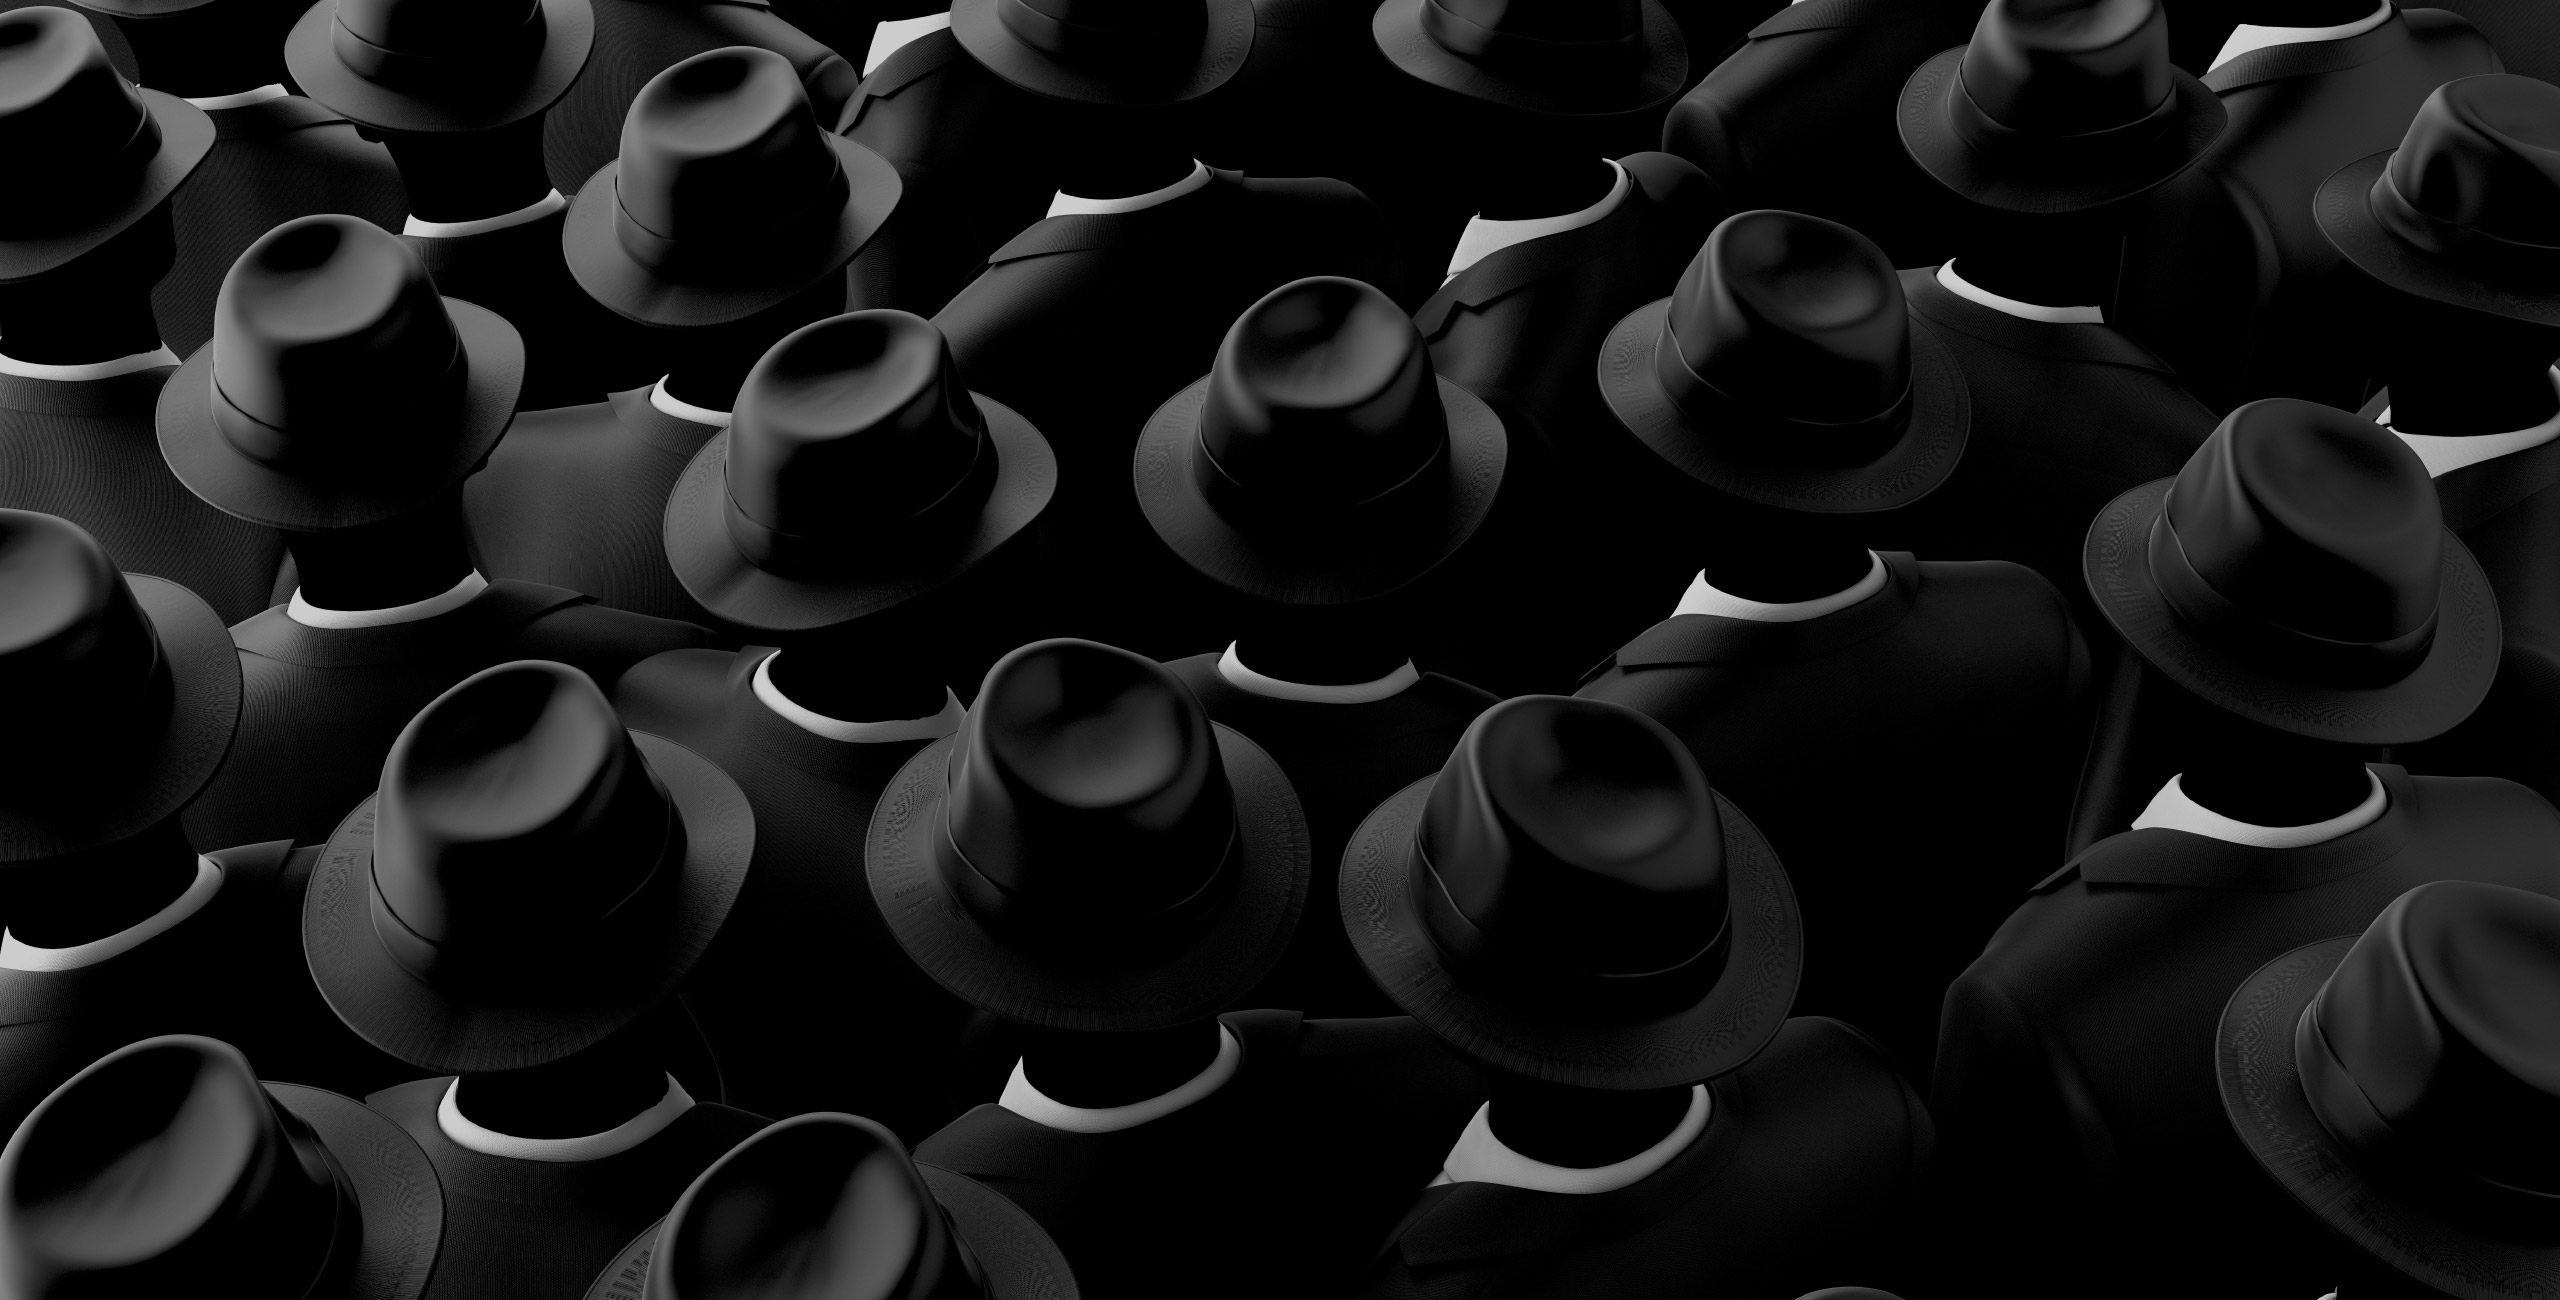 A group of men in black hats.